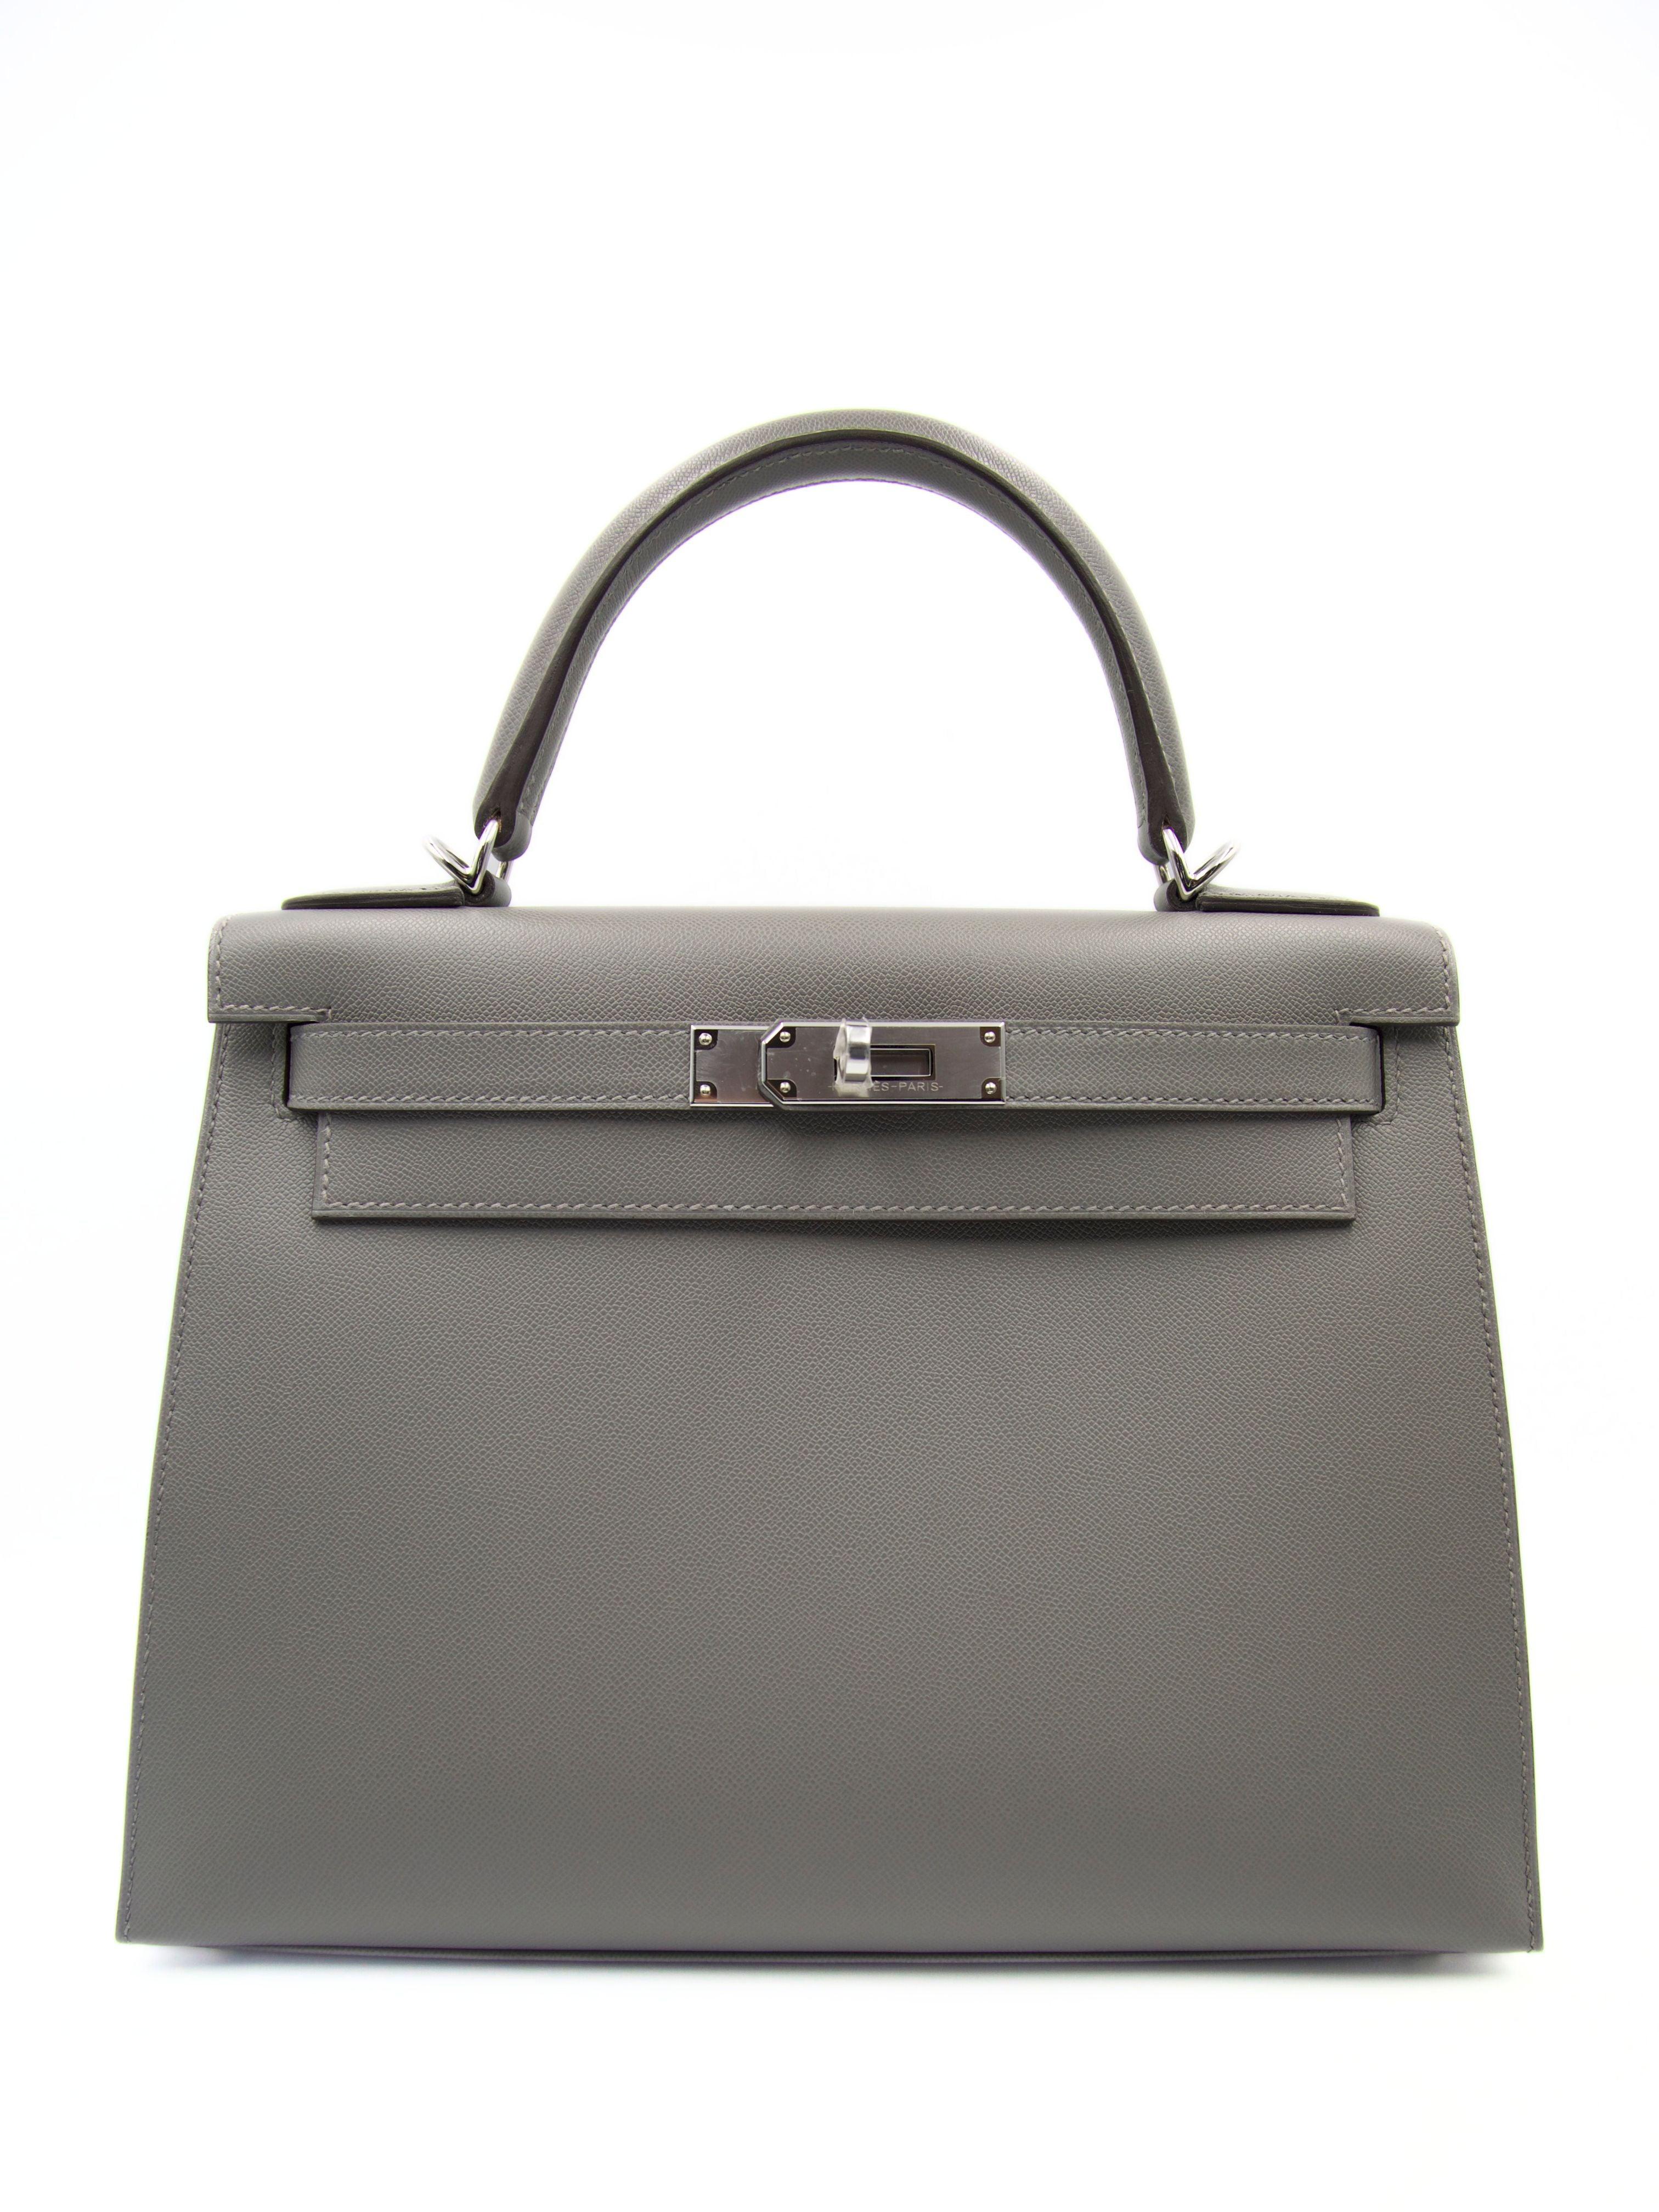 HERMÈS KELLY 28CM SELLIER GRIS MEYER Madame Leather with Palladium Hardware For Sale